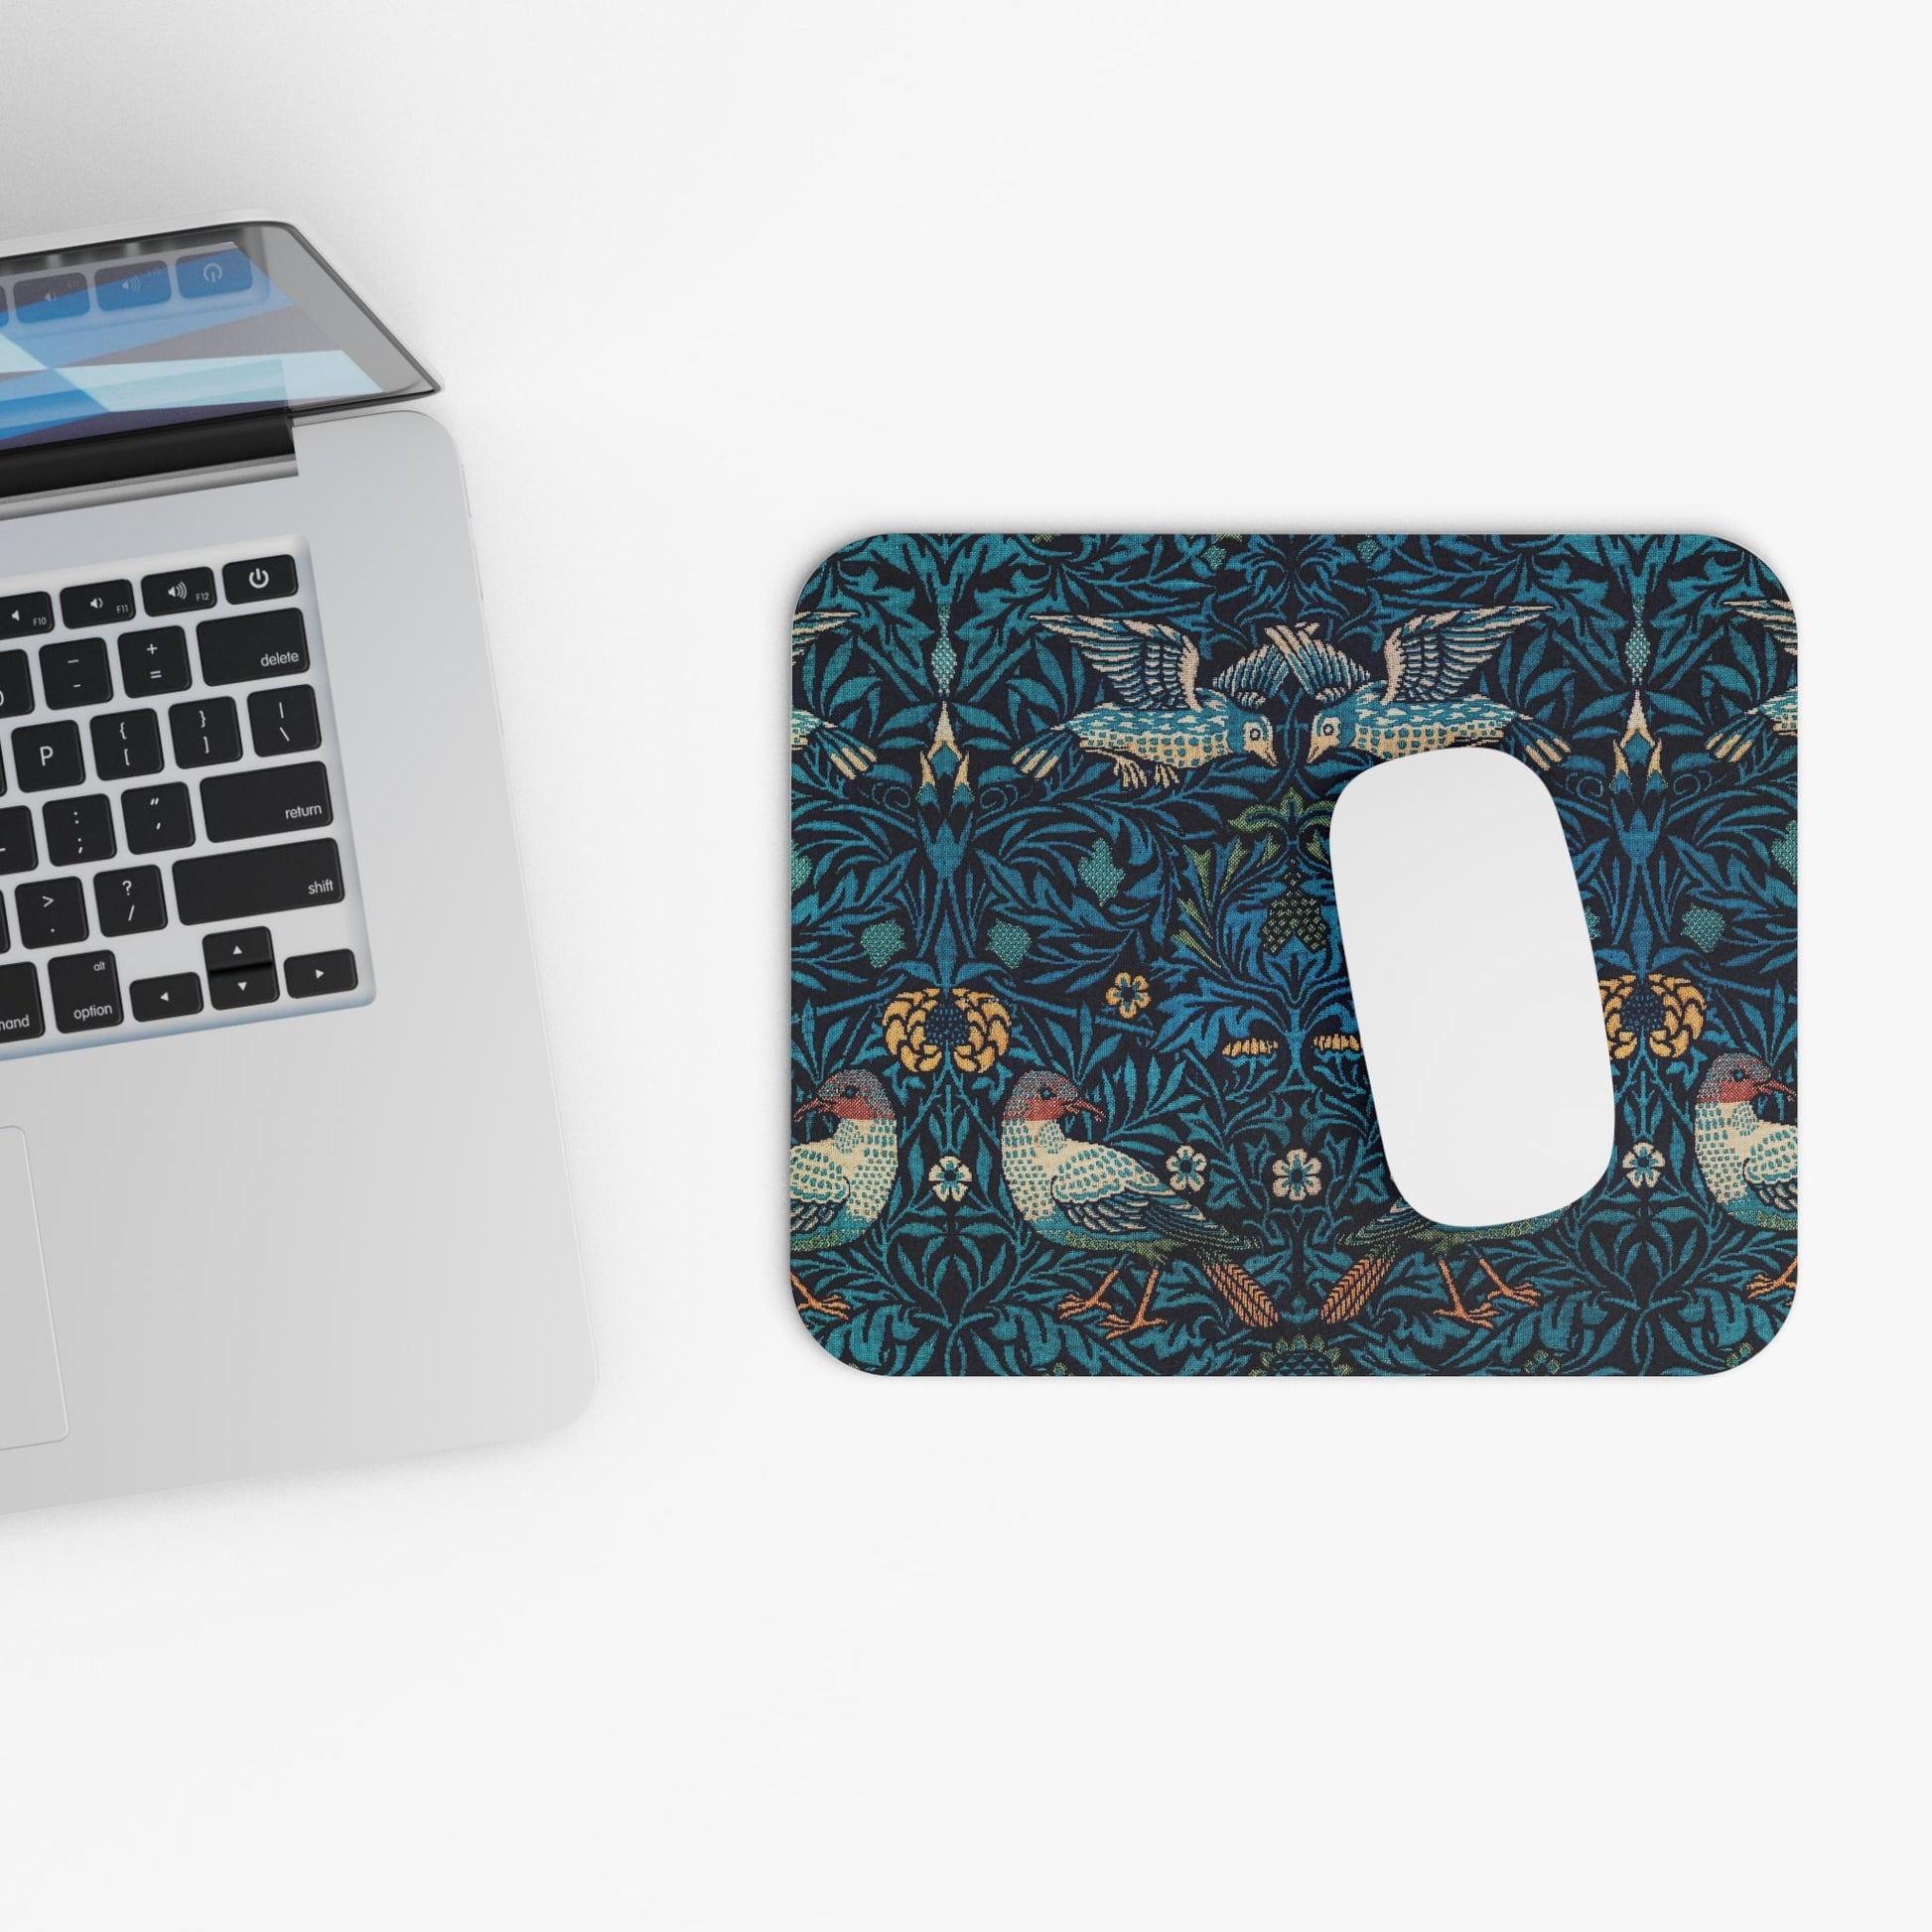 Vintage Blue Nature Pattern Design Laptop Mouse Pad with White Mouse